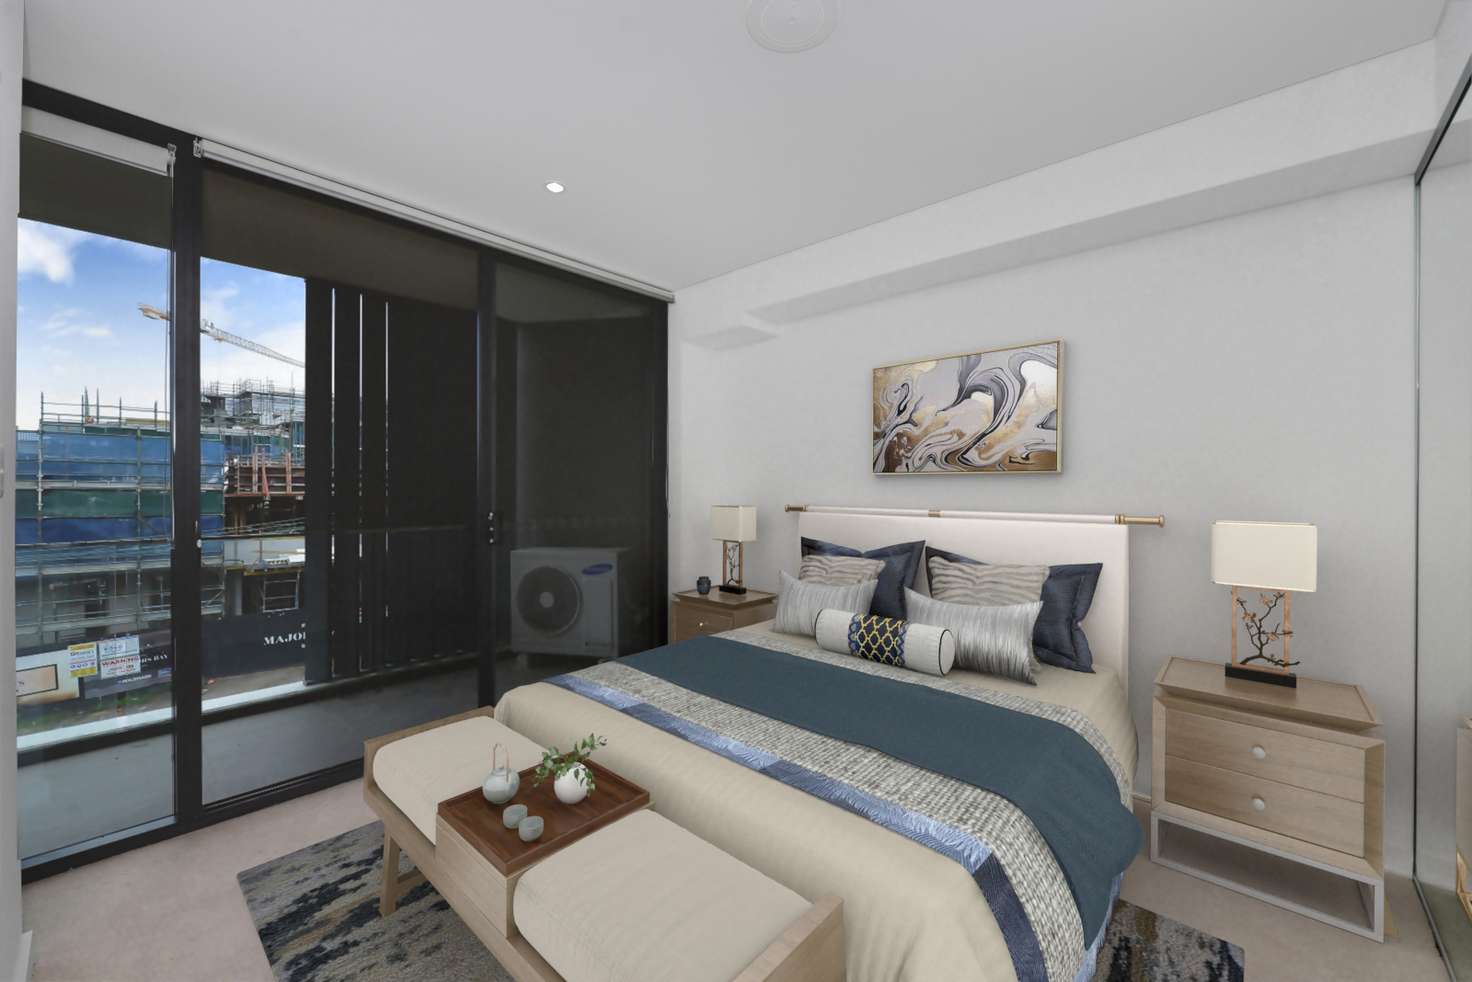 Main view of Homely apartment listing, 204/2 Northcote Street, Mortlake NSW 2137